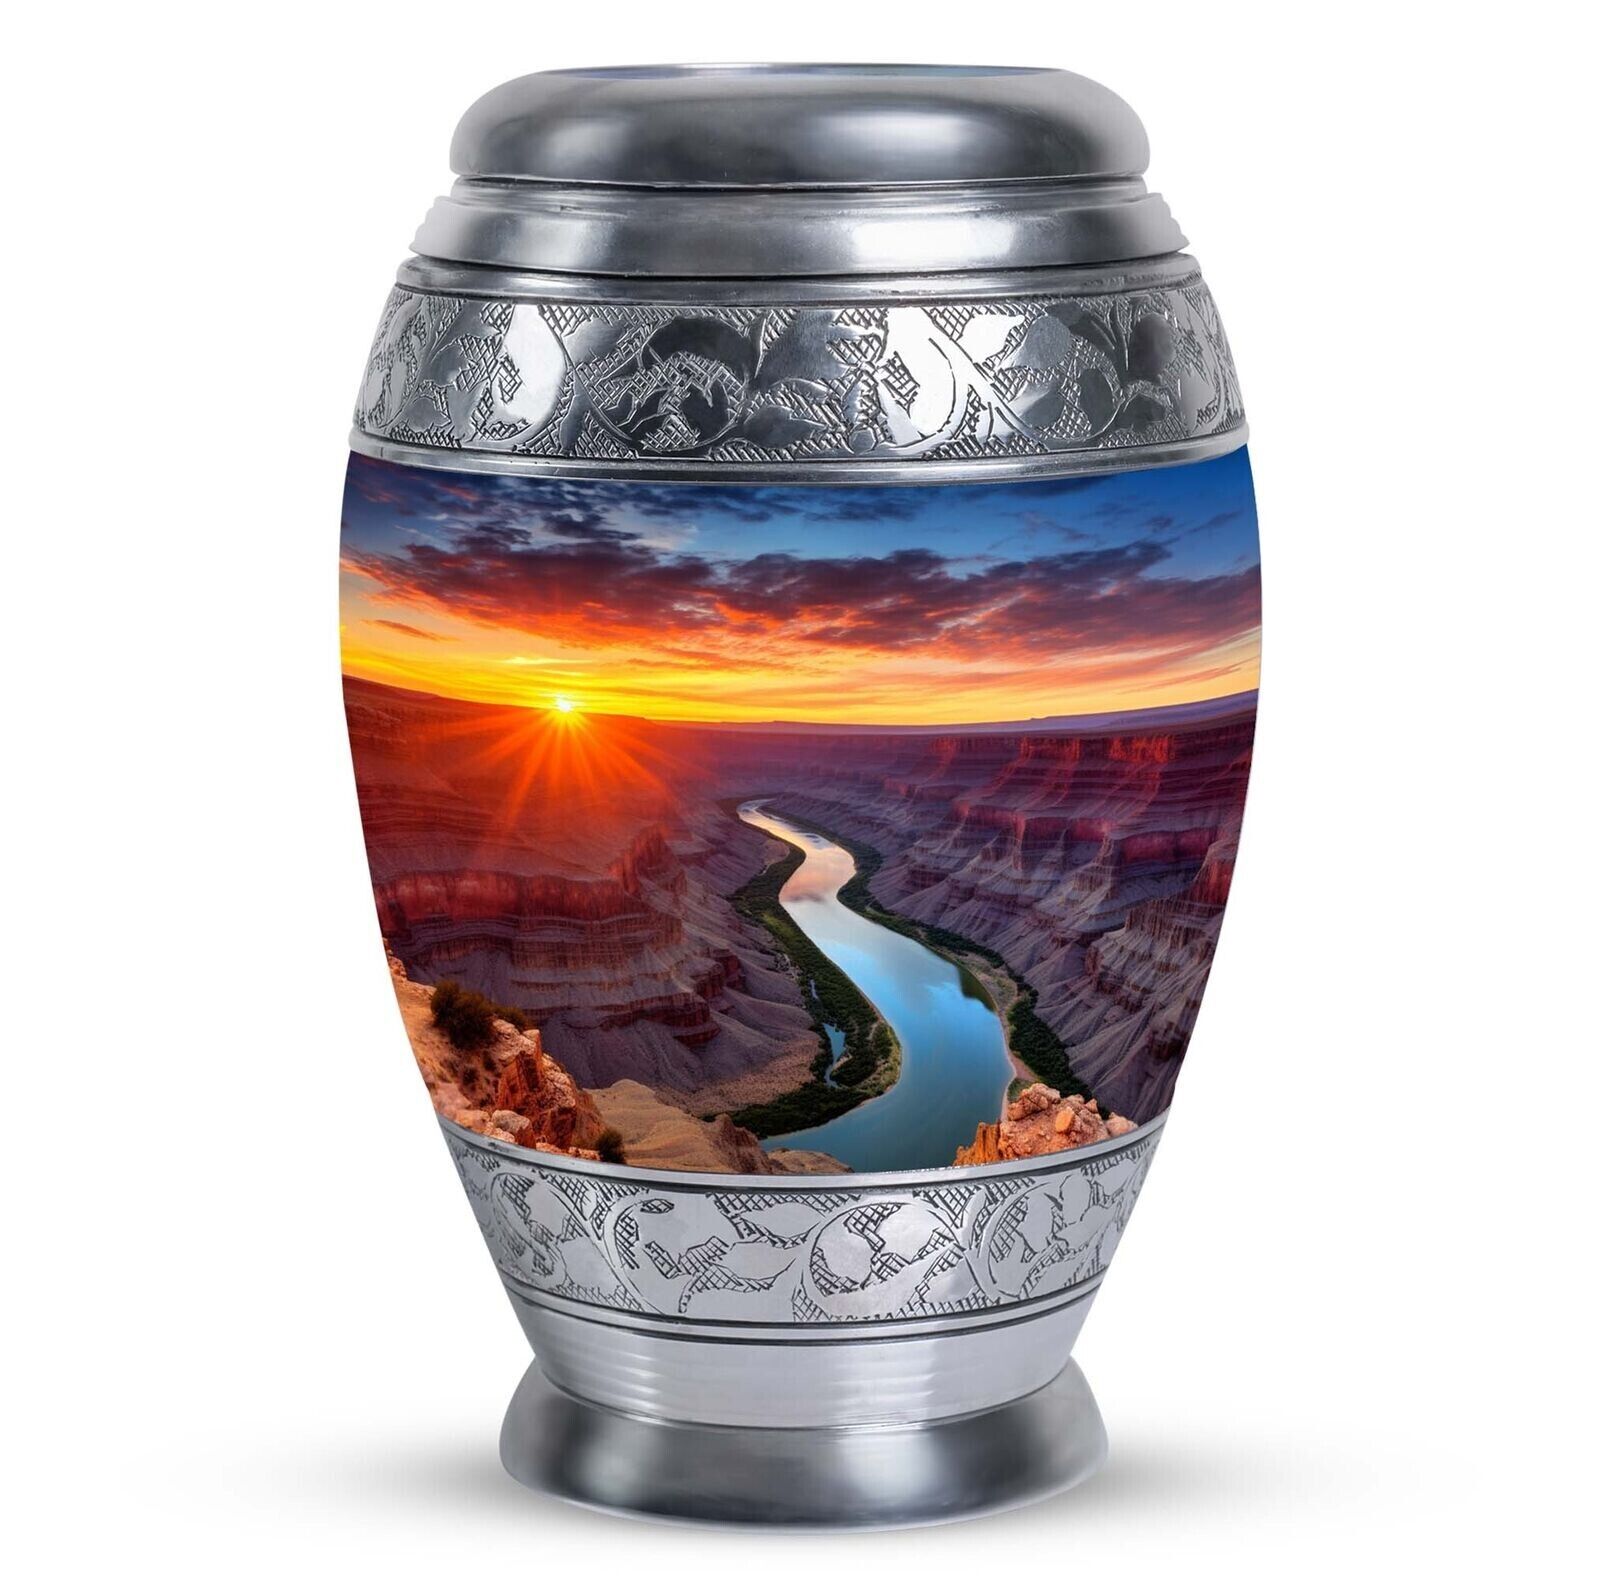 Sunset At The Grand Canyon (10 Inch) Engraved Silver Funeral Urns Custom Burial